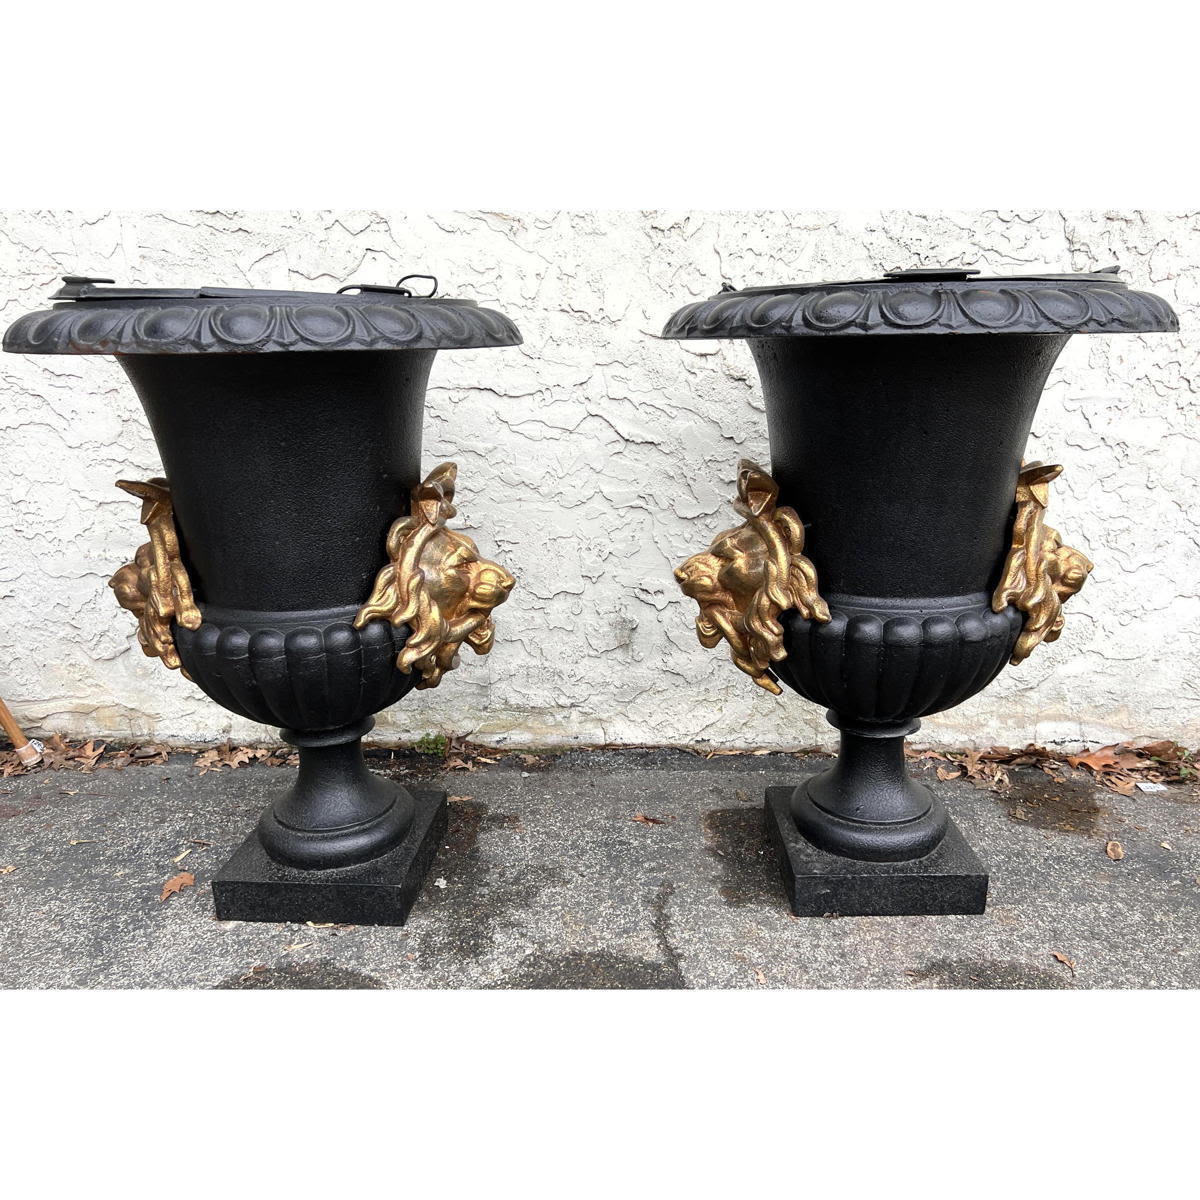 Pair Large Heavy Iron Urn Planters 2bb08a